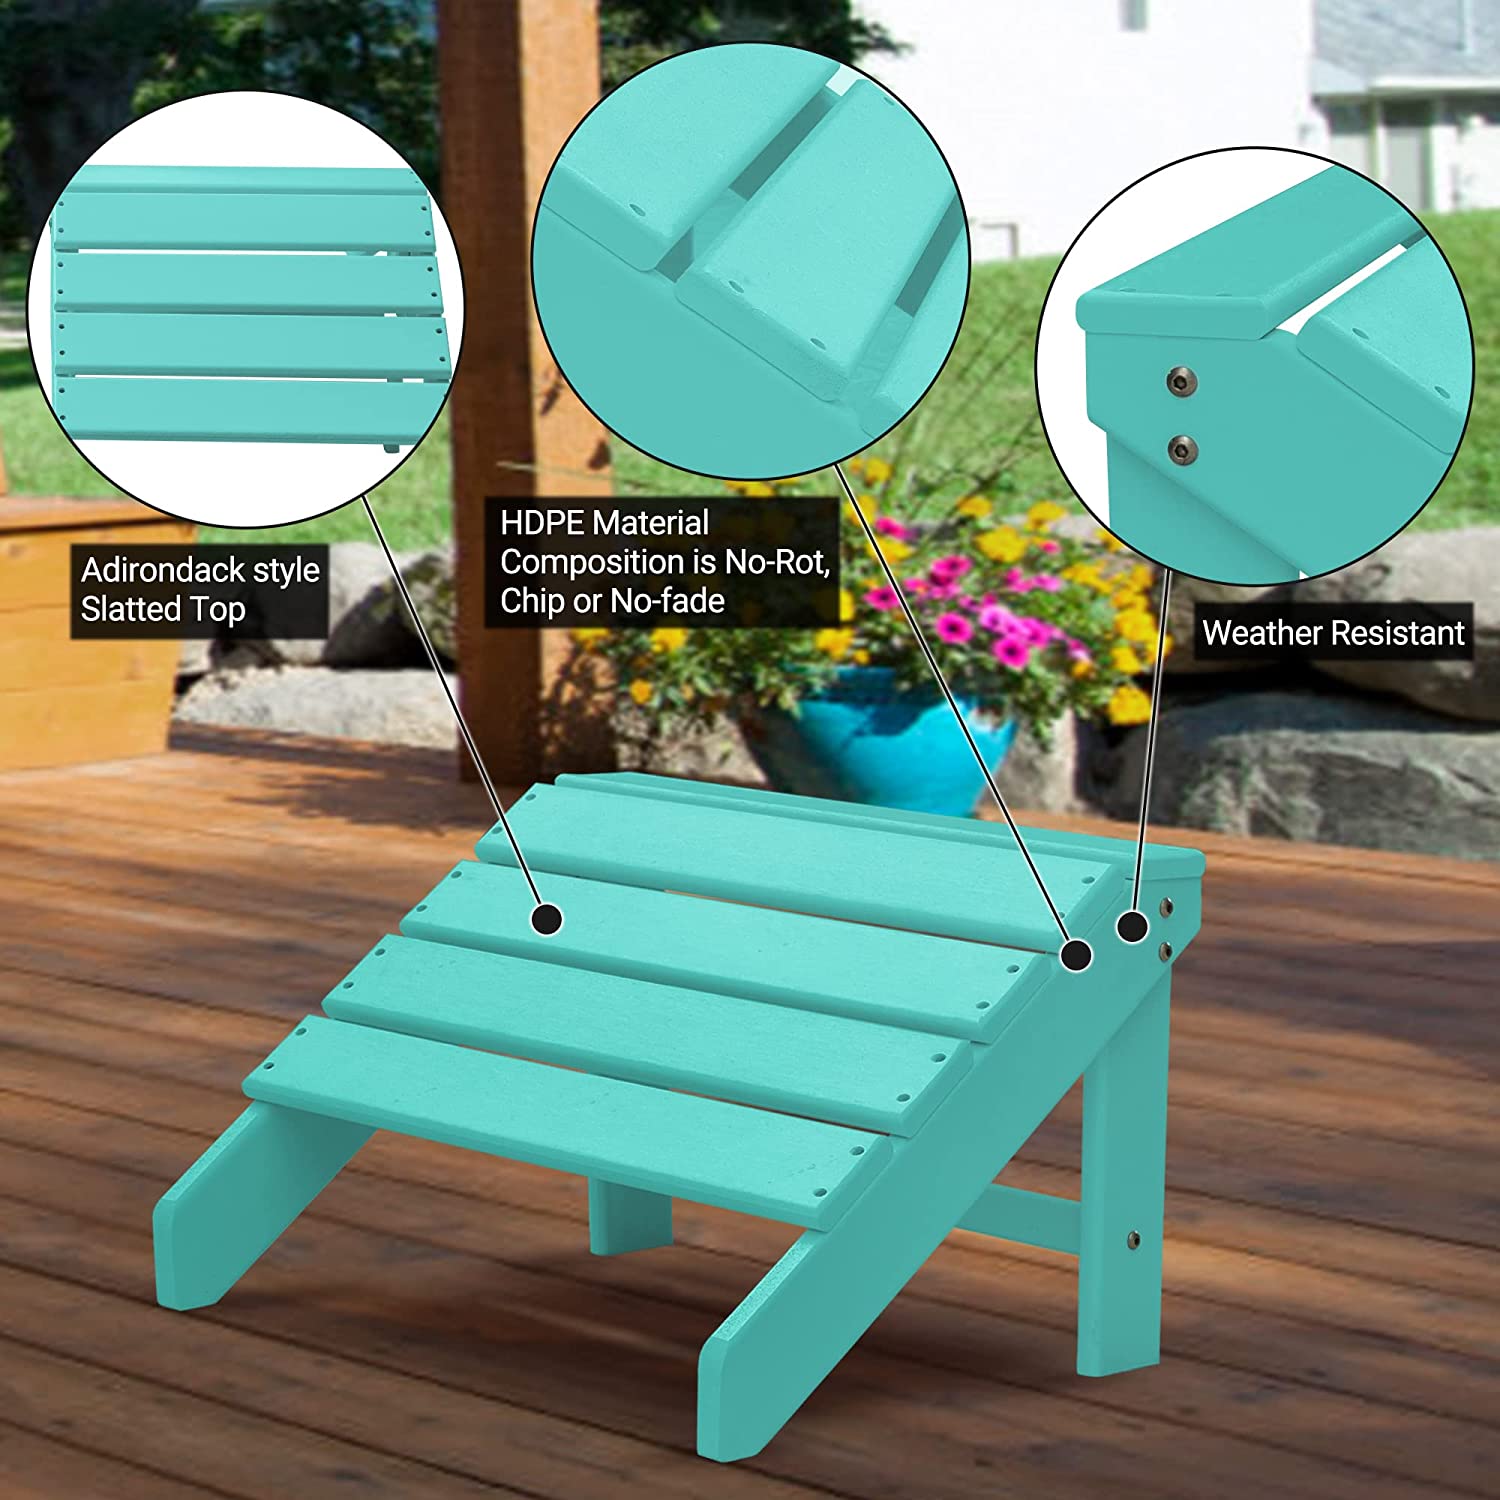 FHFO Adirondack Ottoman and Side Table for Adirondack Chairs, 2 Pieces Outdoor Adirondack Footrest & 1 Piece End Table, Weather Resistant Footstool Table for Adirondack Chair （Lake Blue） - image 2 of 5